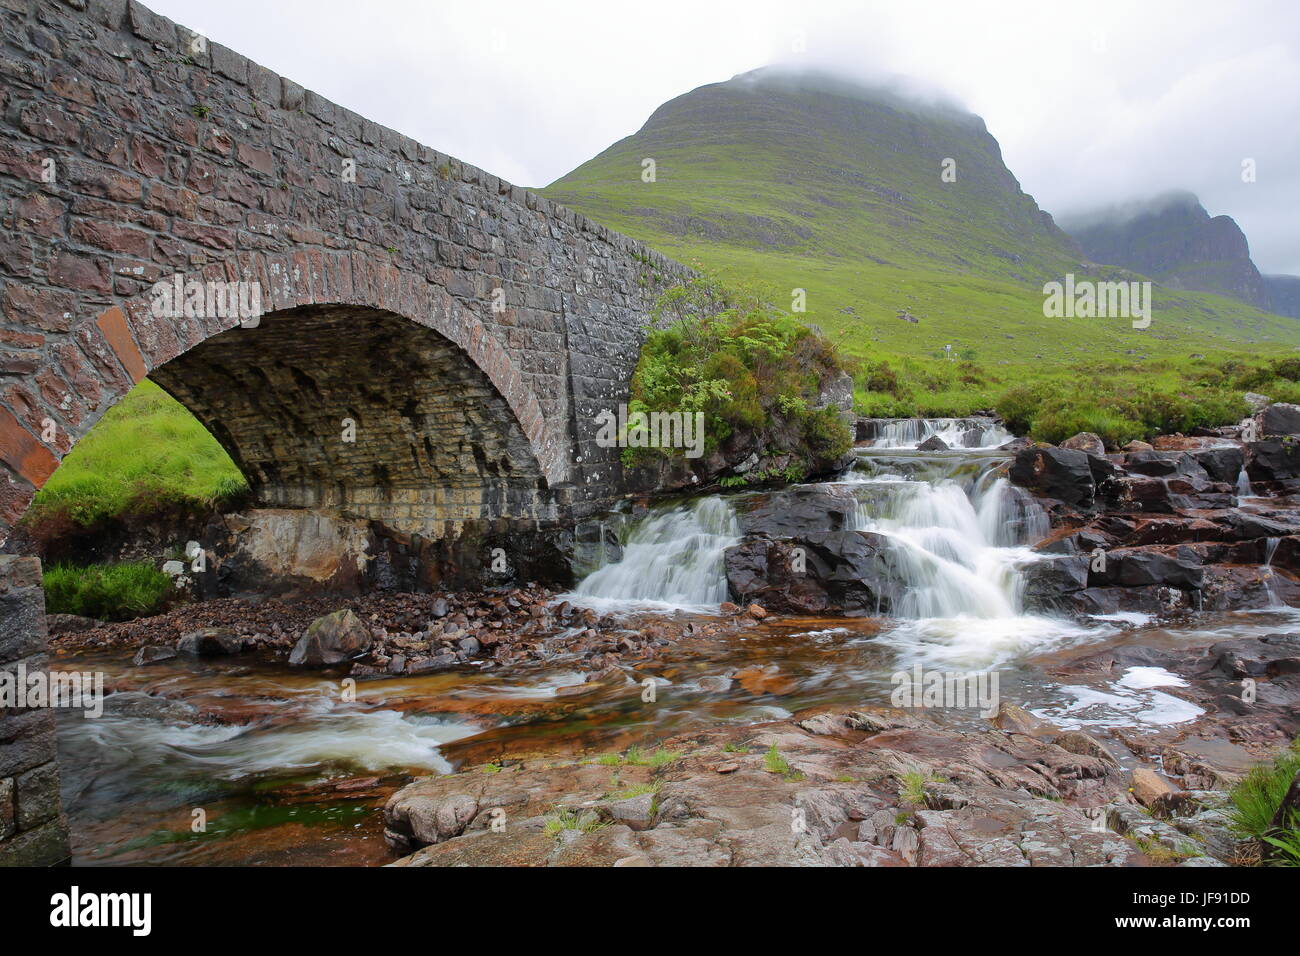 An old bridge and the river Russel on the road leading to Bealach na Ba pass near Applecross in the Northern Highlands, Scotland, UK Stock Photo